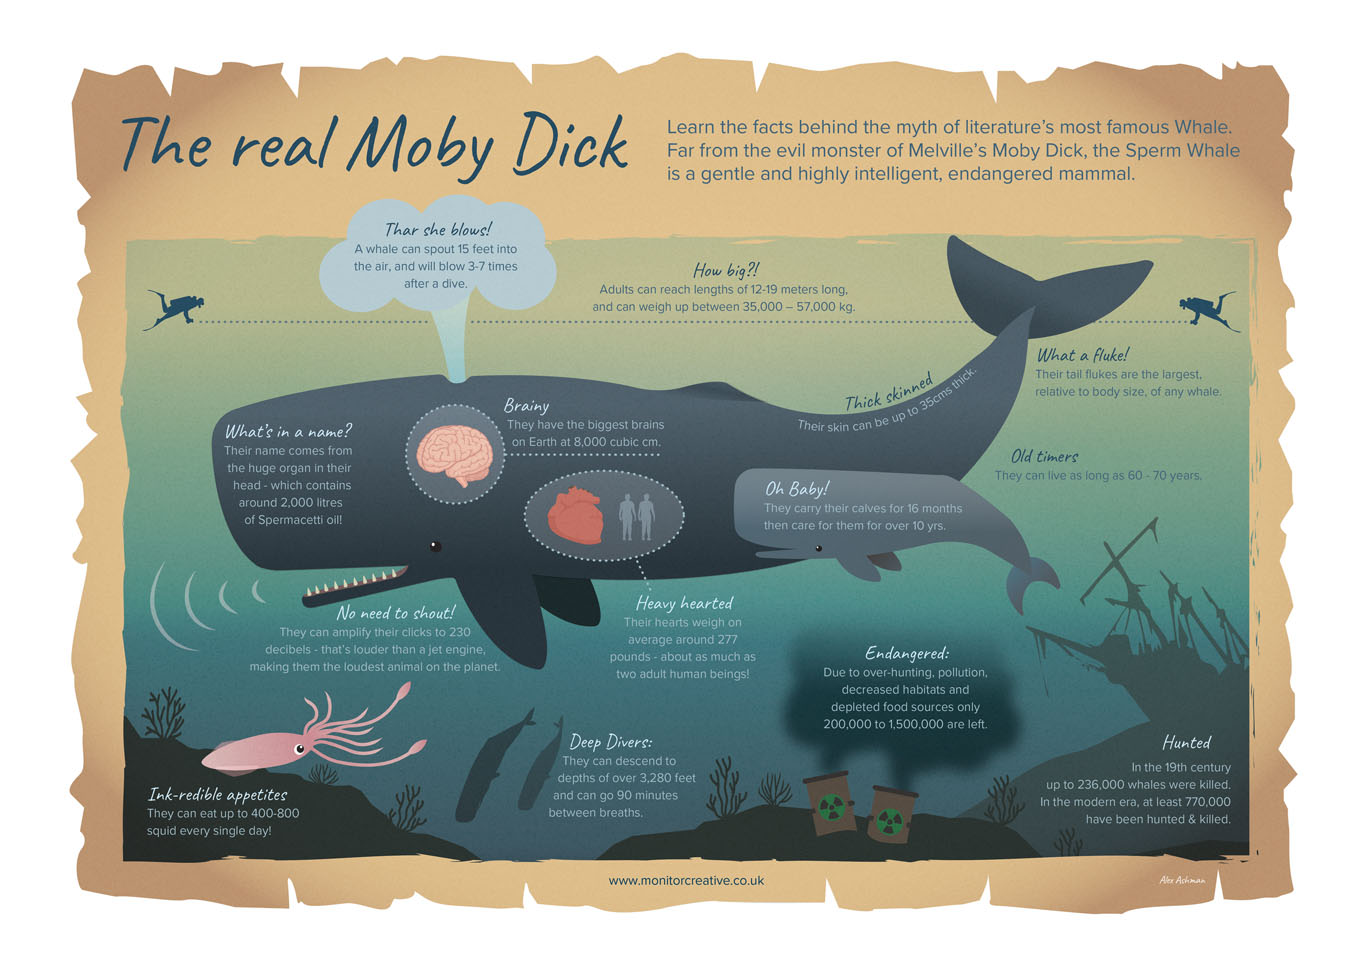 How is the whale moby dick a brute